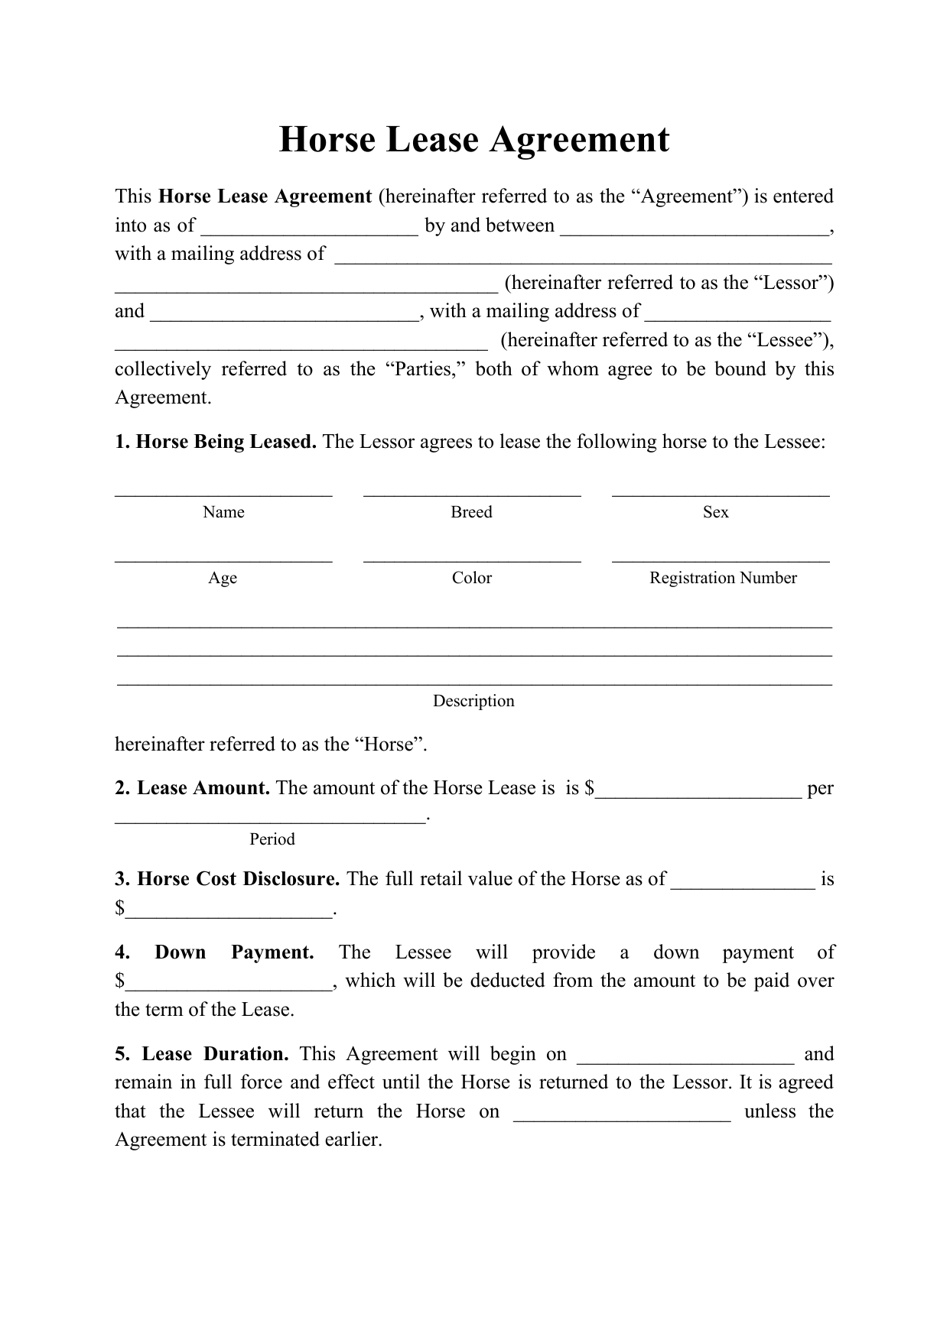 Horse Lease Agreement Template, Page 1